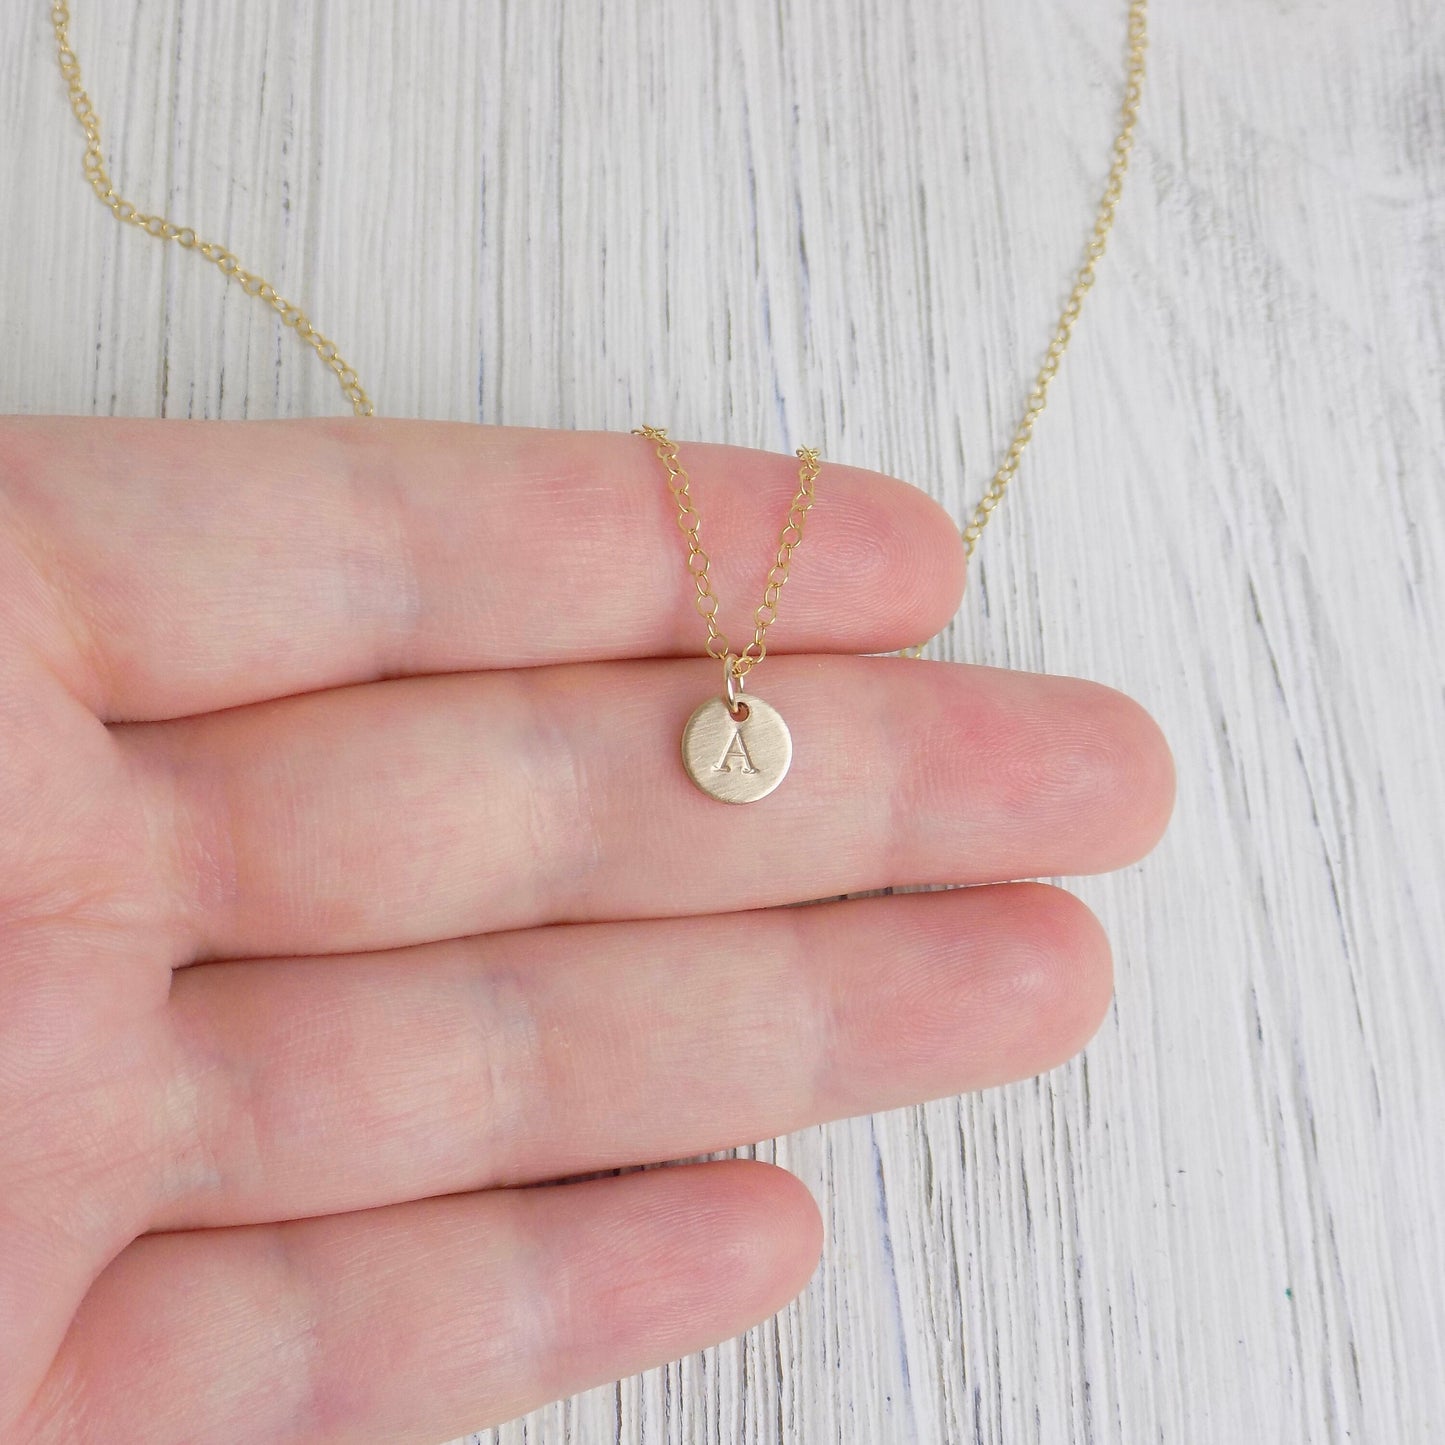 Gifts For Her - Tiny Initial Necklace - 14K Gold Filled Brushed Matte Satin Finish - Personalized Layering Necklace Gold Coin - Z1-20